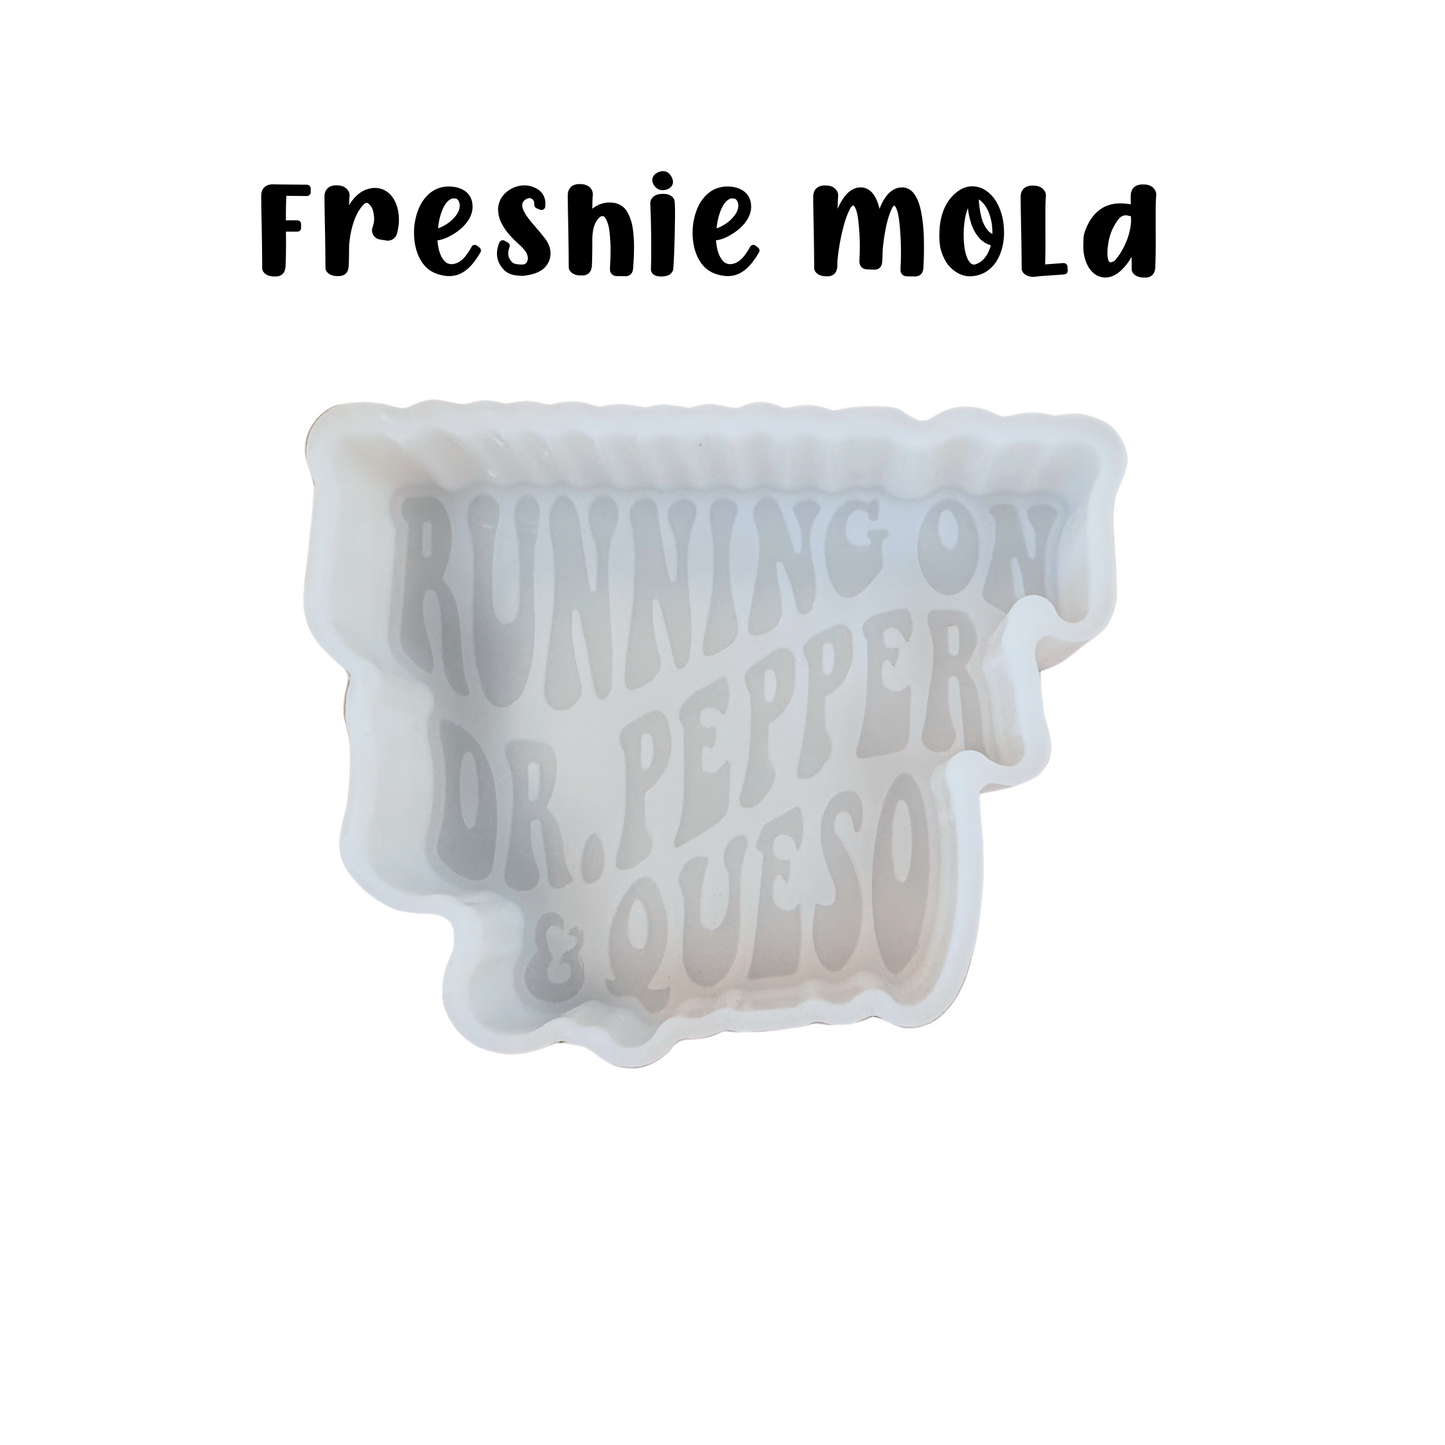 Running on Dr P & Queso Silicone Mold 3 x 4 x 0.8”